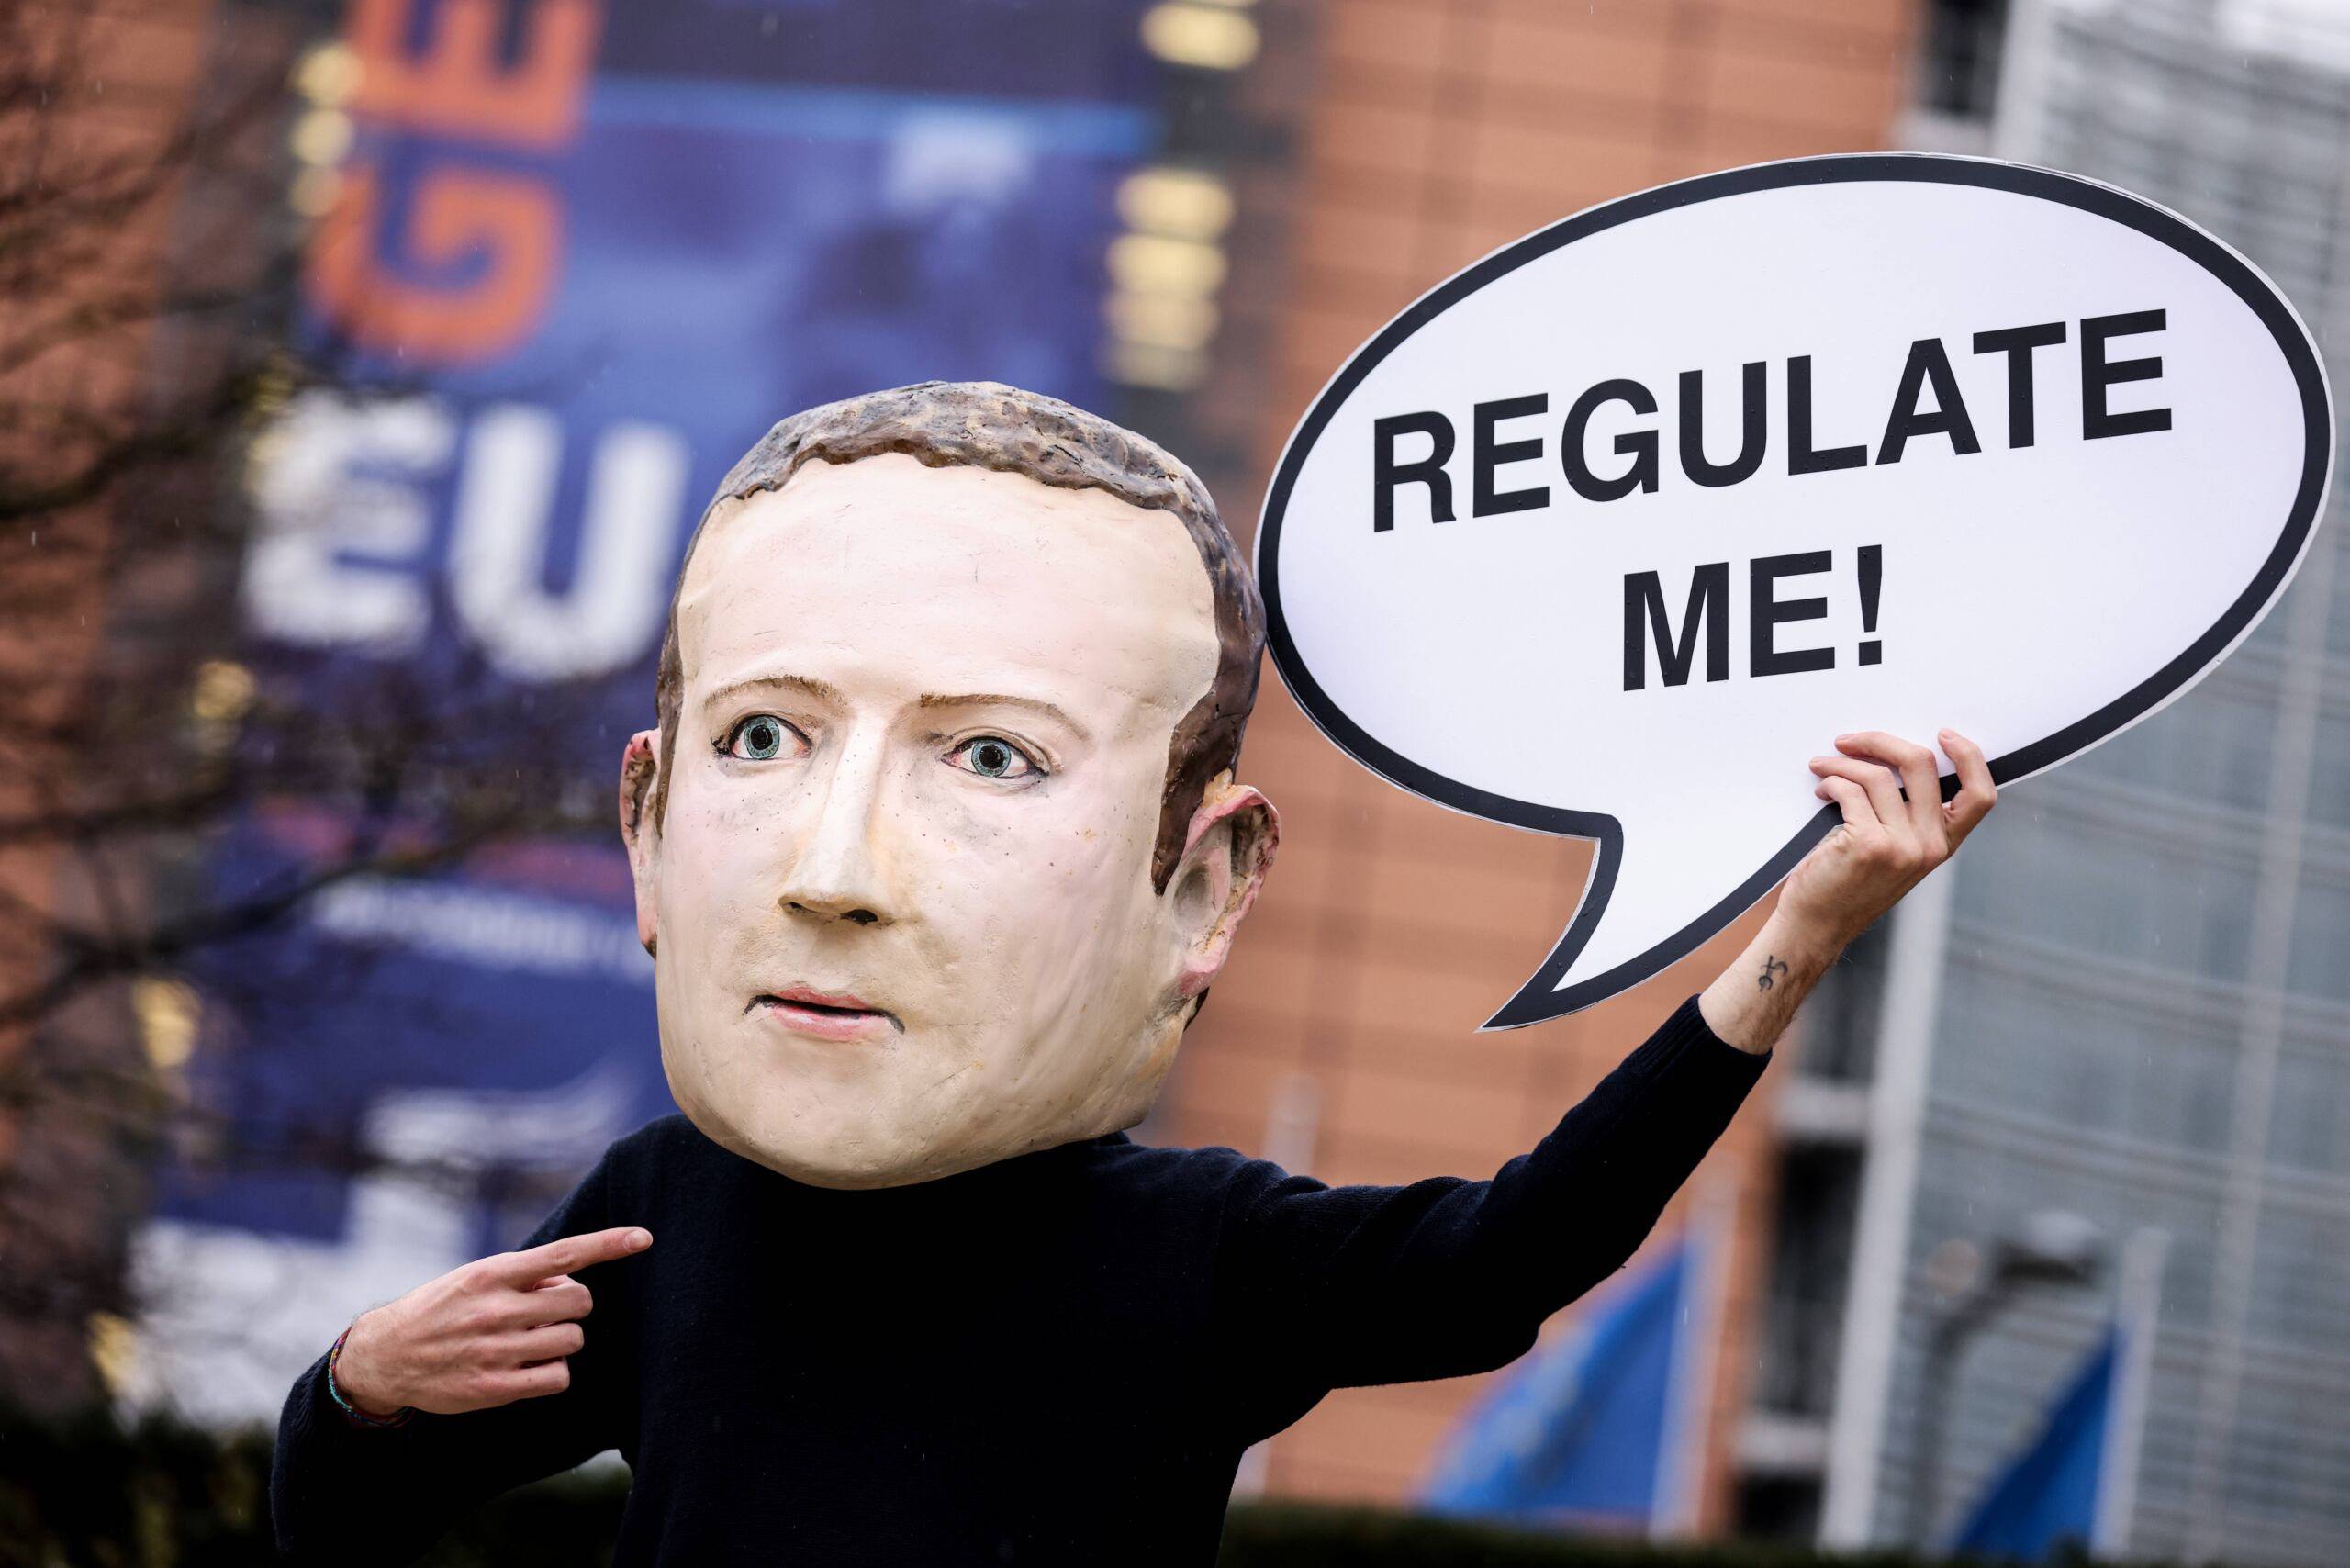 An activist of environmental NGO Avaaz wearing a mask depicting Facebook CEO Mark Zuckerberg holds a banner reading "Regulate me" during an action marking the release of the Digital Services Act, outside the European Commission building in Brussels on December 15, 2020. - The European Union on December 15, 2020 will unveil tough draft rules targeting tech giants like Google, Amazon and Facebook, whose power Brussels sees as a threat to competition and even democracy. (Photo by Kenzo TRIBOUILLARD / AFP)